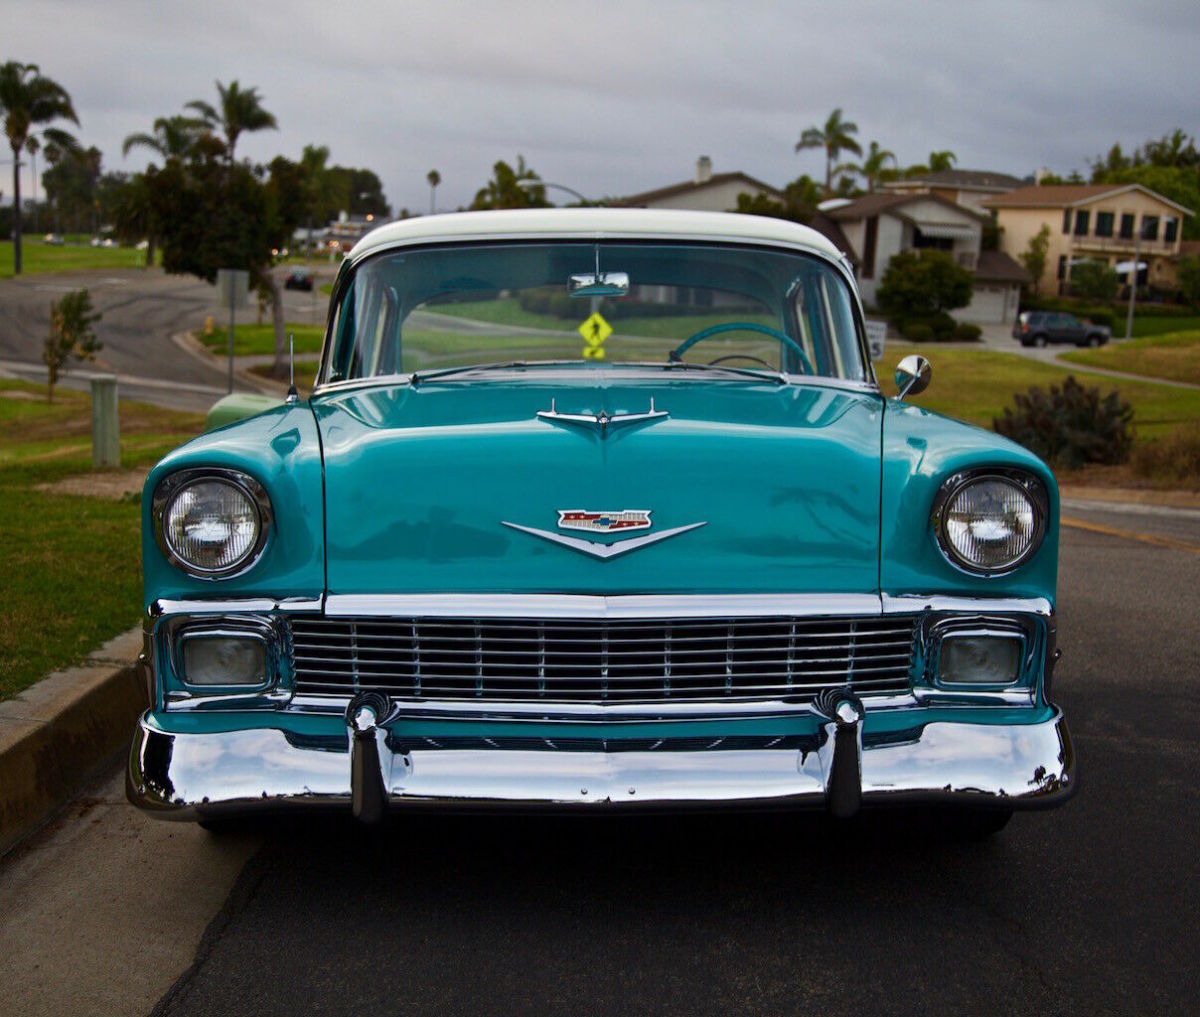 Albums 103+ Images 1956 chevy bel air pictures Superb